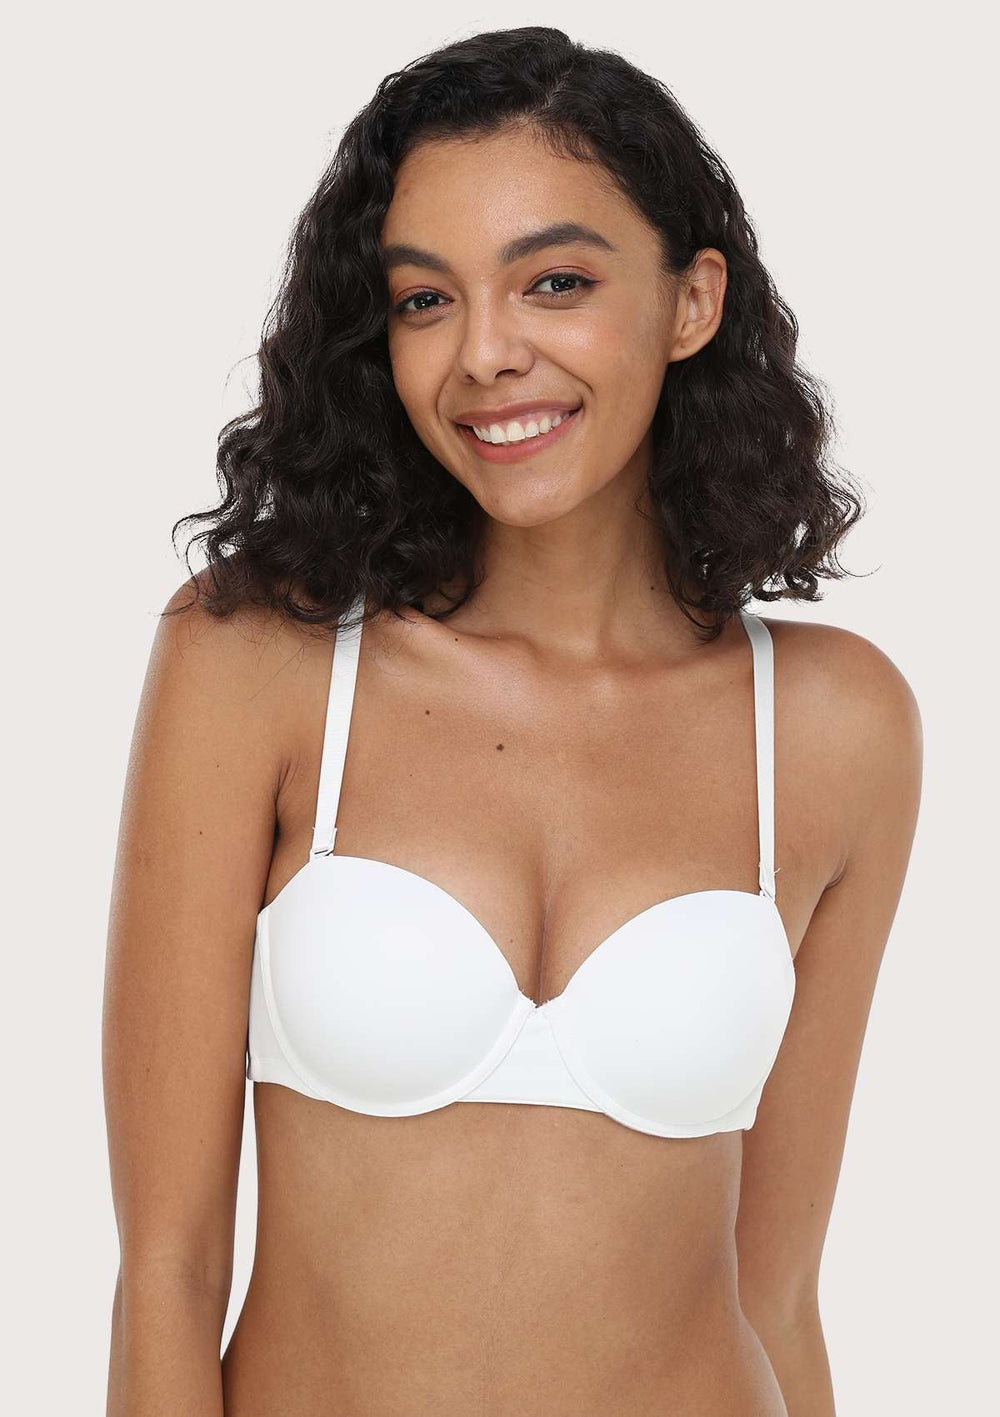 HSIA Strapless Bras for Women Push Up, Underwire Bra for Big